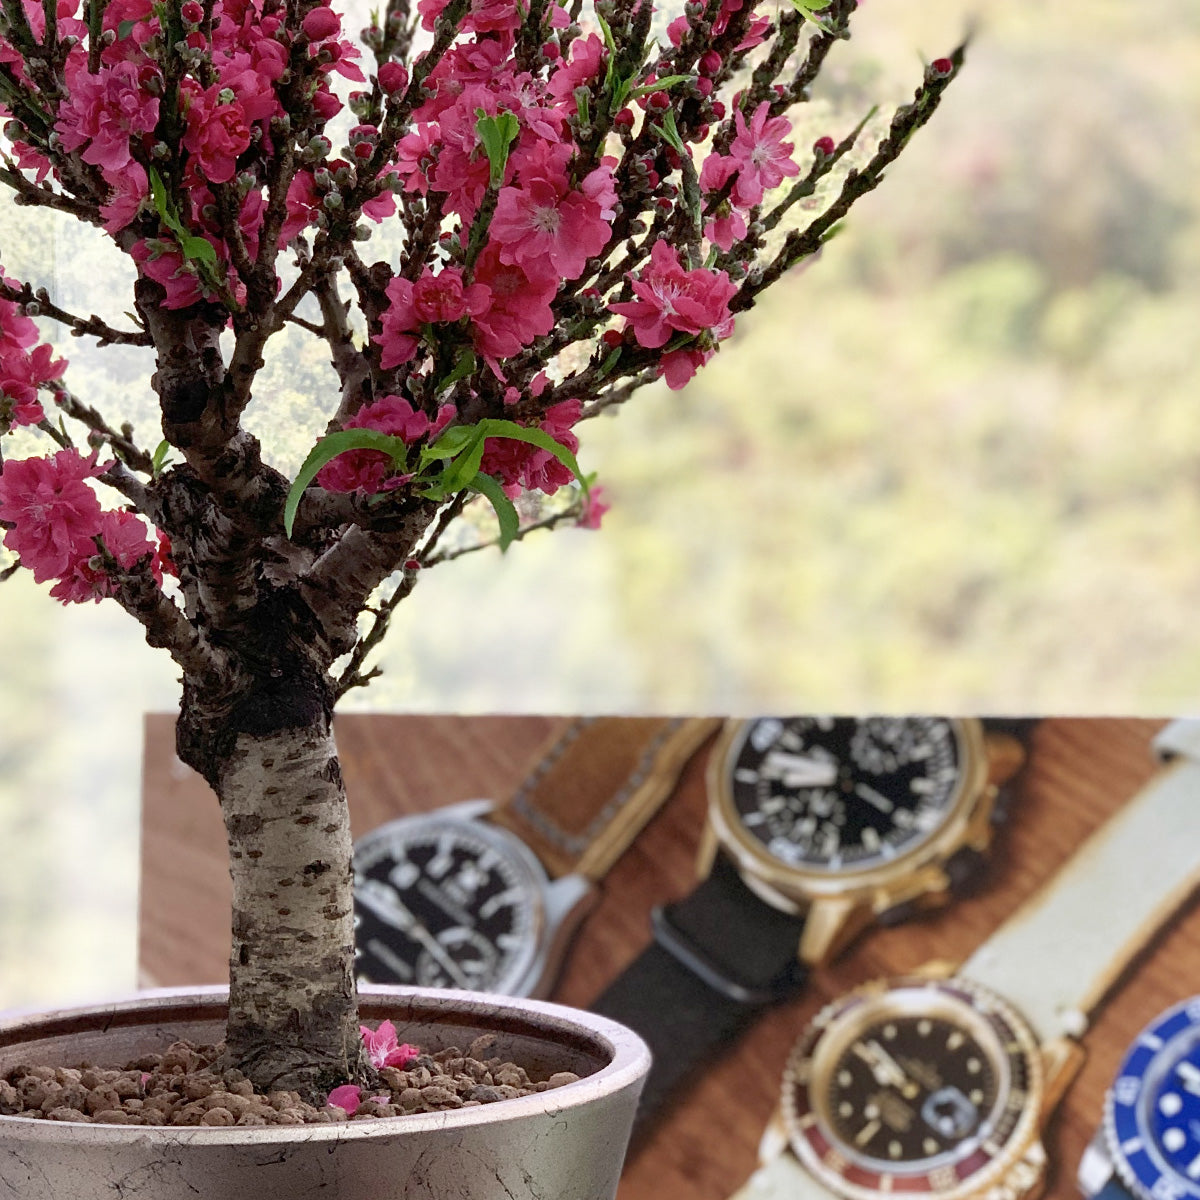 CNY 2022 Greetings & The Best CNY Gold Seiko Watches